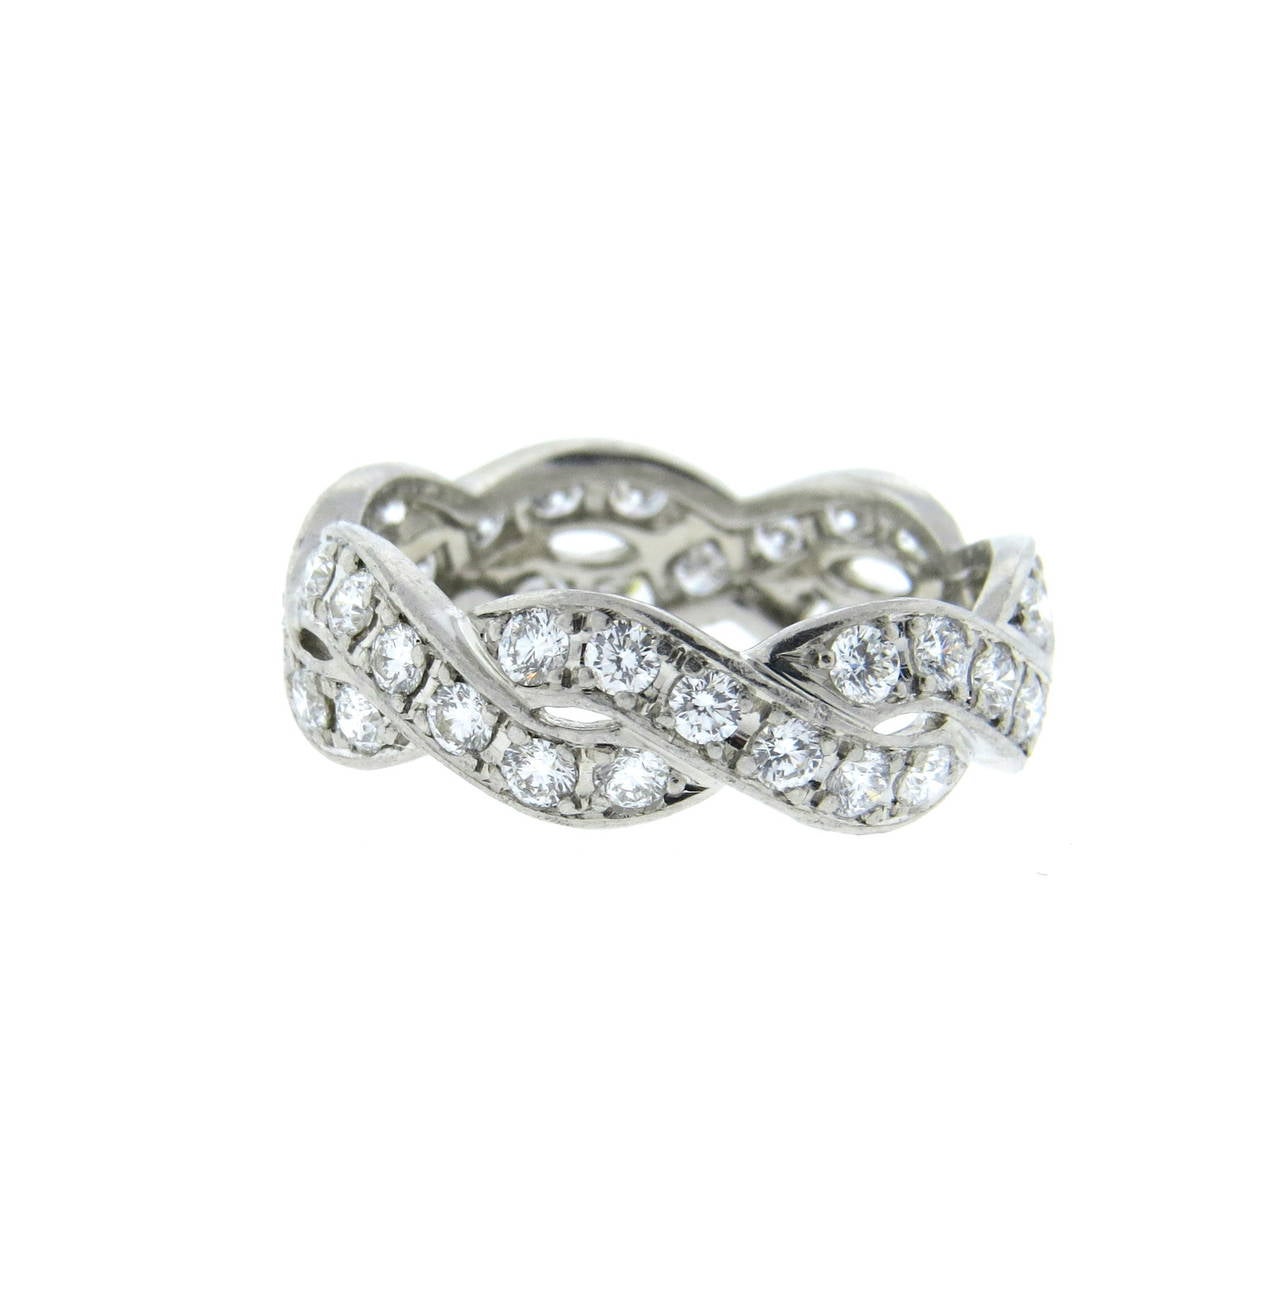 Platinum braided band ring, featuring approximately 1.10-1.20ctw in FG/VS diamonds. Ring is a size 6 1/2, ring is 6.2mm wide. Marked Suwa,pt950,483T6. Weight - 5.4 grams